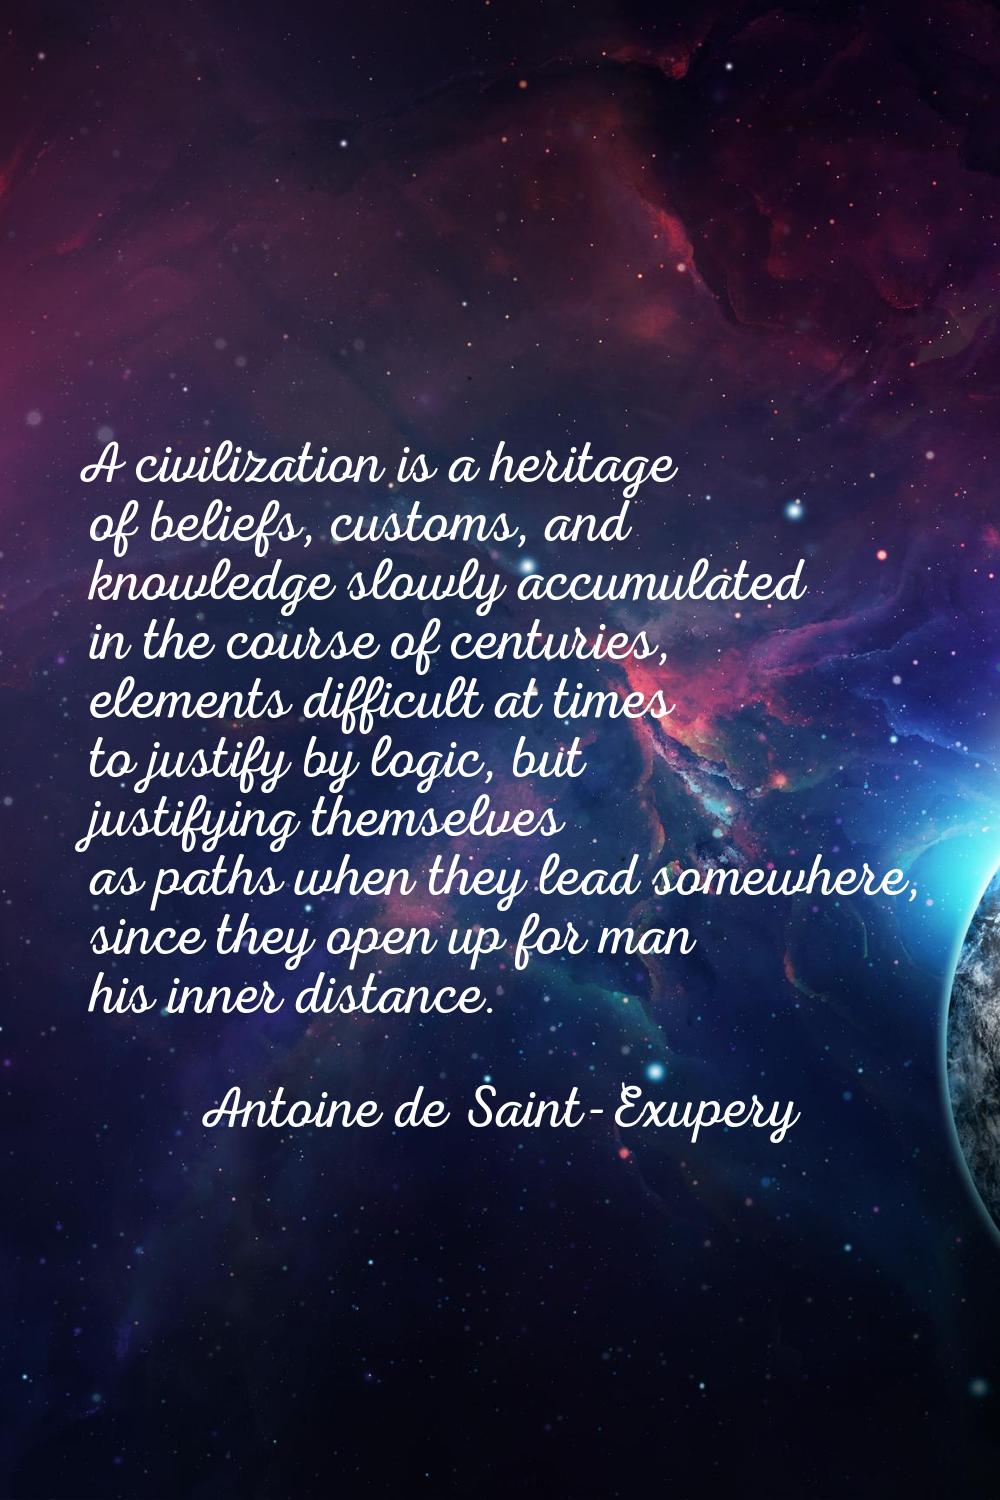 A civilization is a heritage of beliefs, customs, and knowledge slowly accumulated in the course of